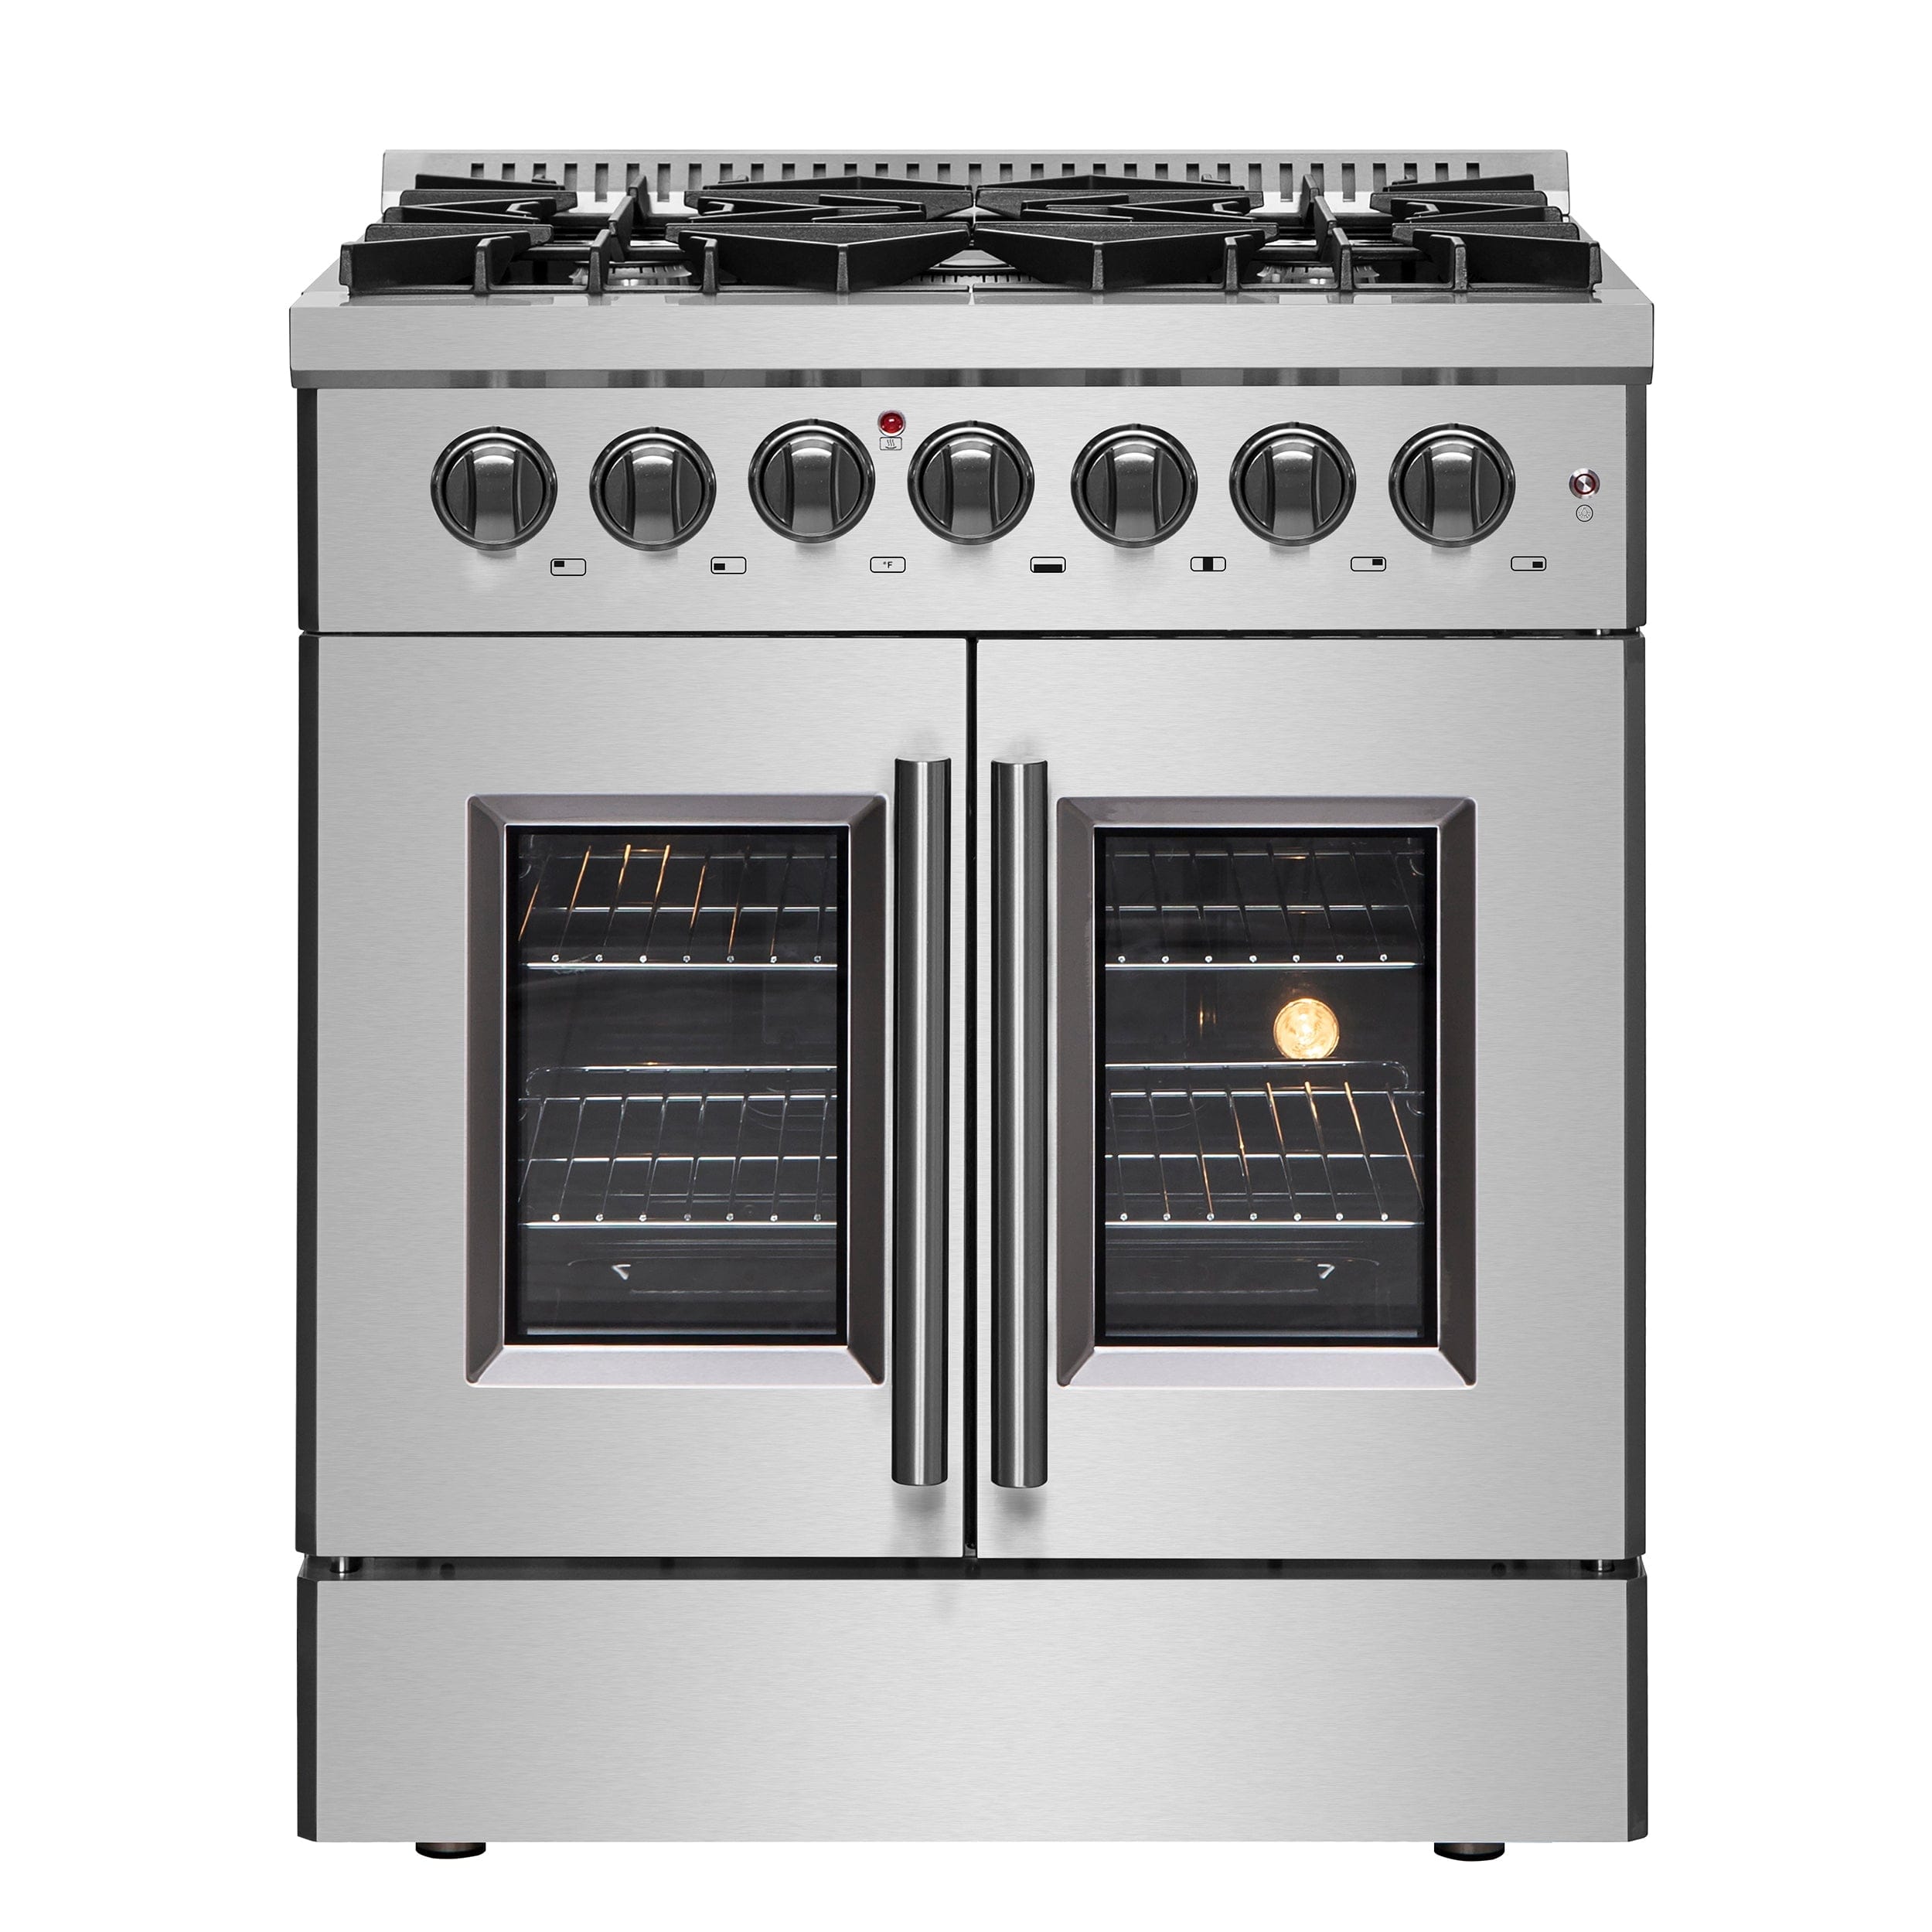 Forno Galiano 30" Gas Burner, Electric Oven Range With French Door in Stainless Steel, FFSGS6356-30 Ranges FFSGS6356-30 Luxury Appliances Direct